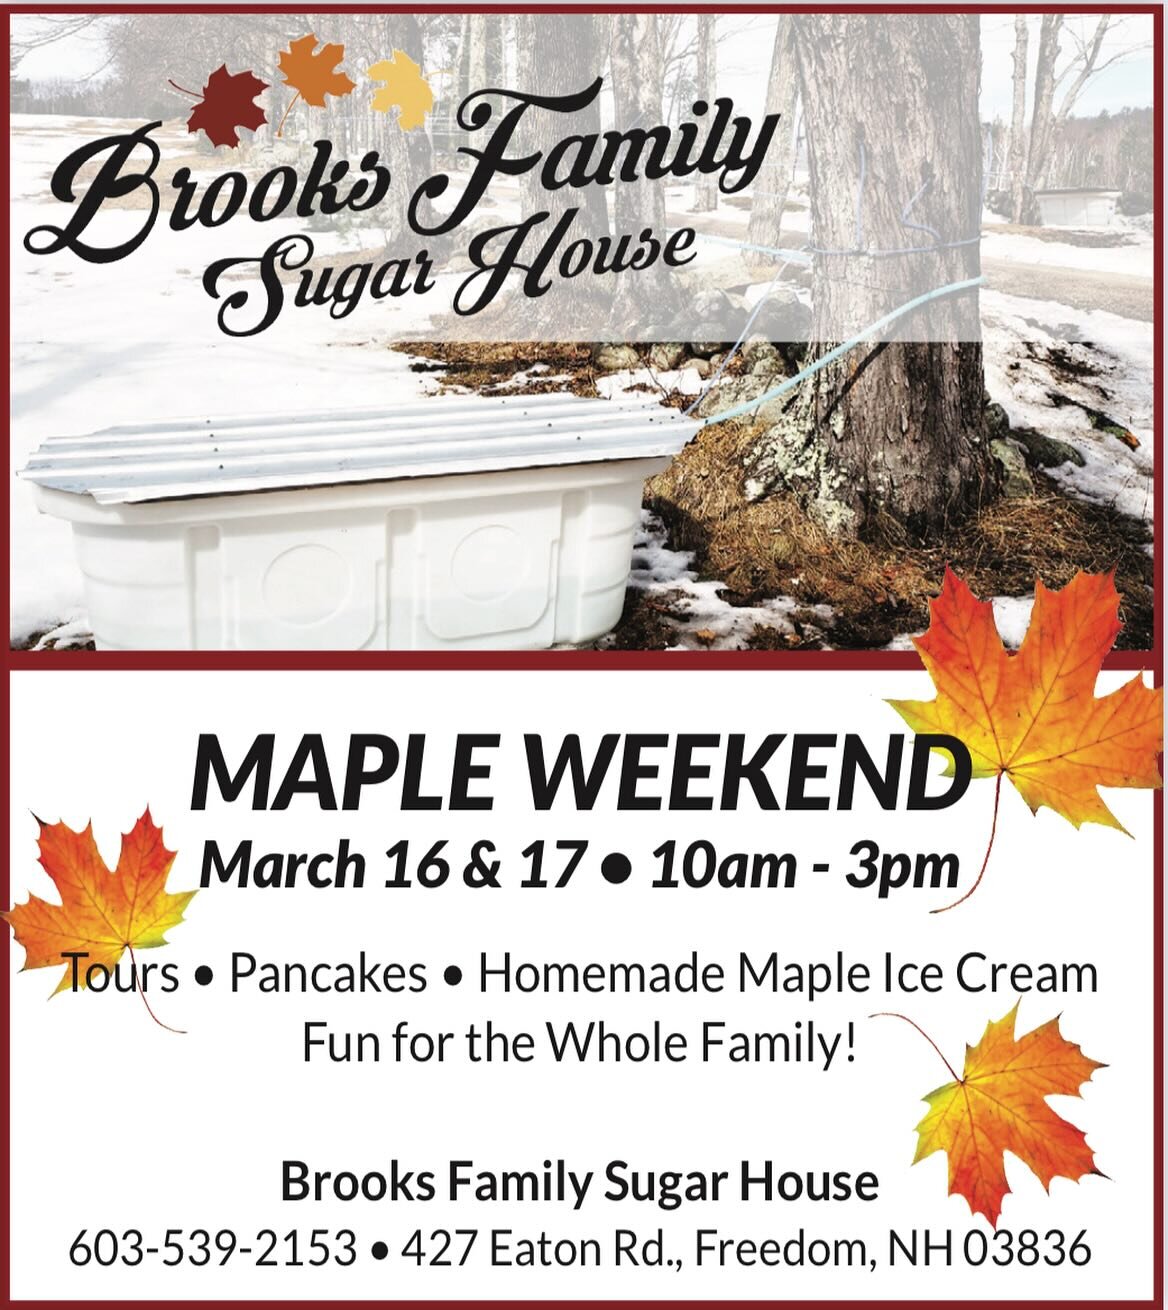 Maple Weekend is this weekend and we are beyond excited to see everyone! When you are out and about this weekend make sure to stop into the surrounding local sugar houses in our area. @machillmaple @turkeystreetmaples @ymrsugarhouse @mooneyhillmaples